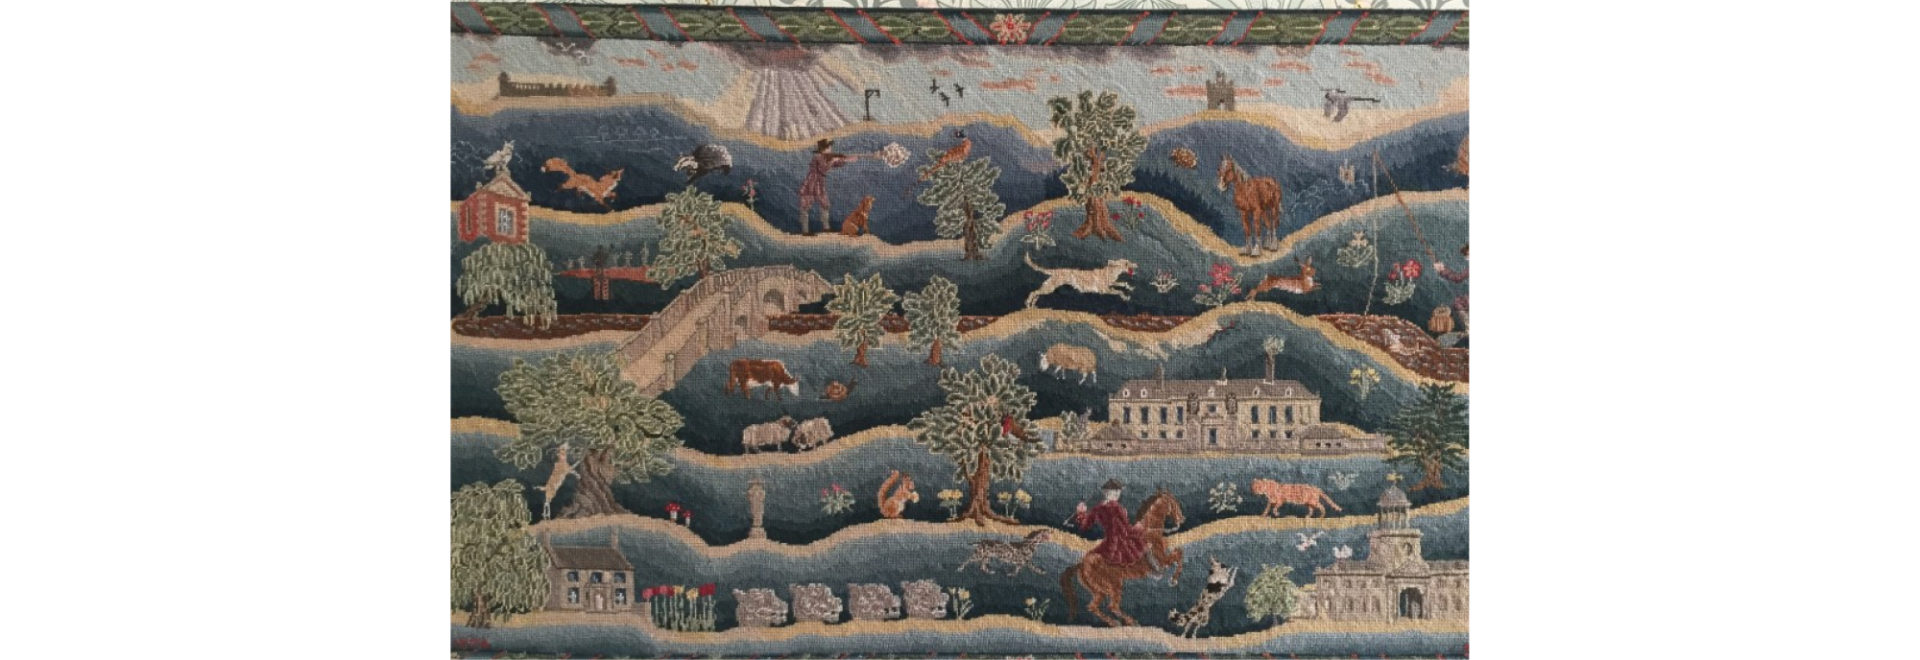 Wool tapestry of Wallington Estate depicting the house and many animals in the landscape